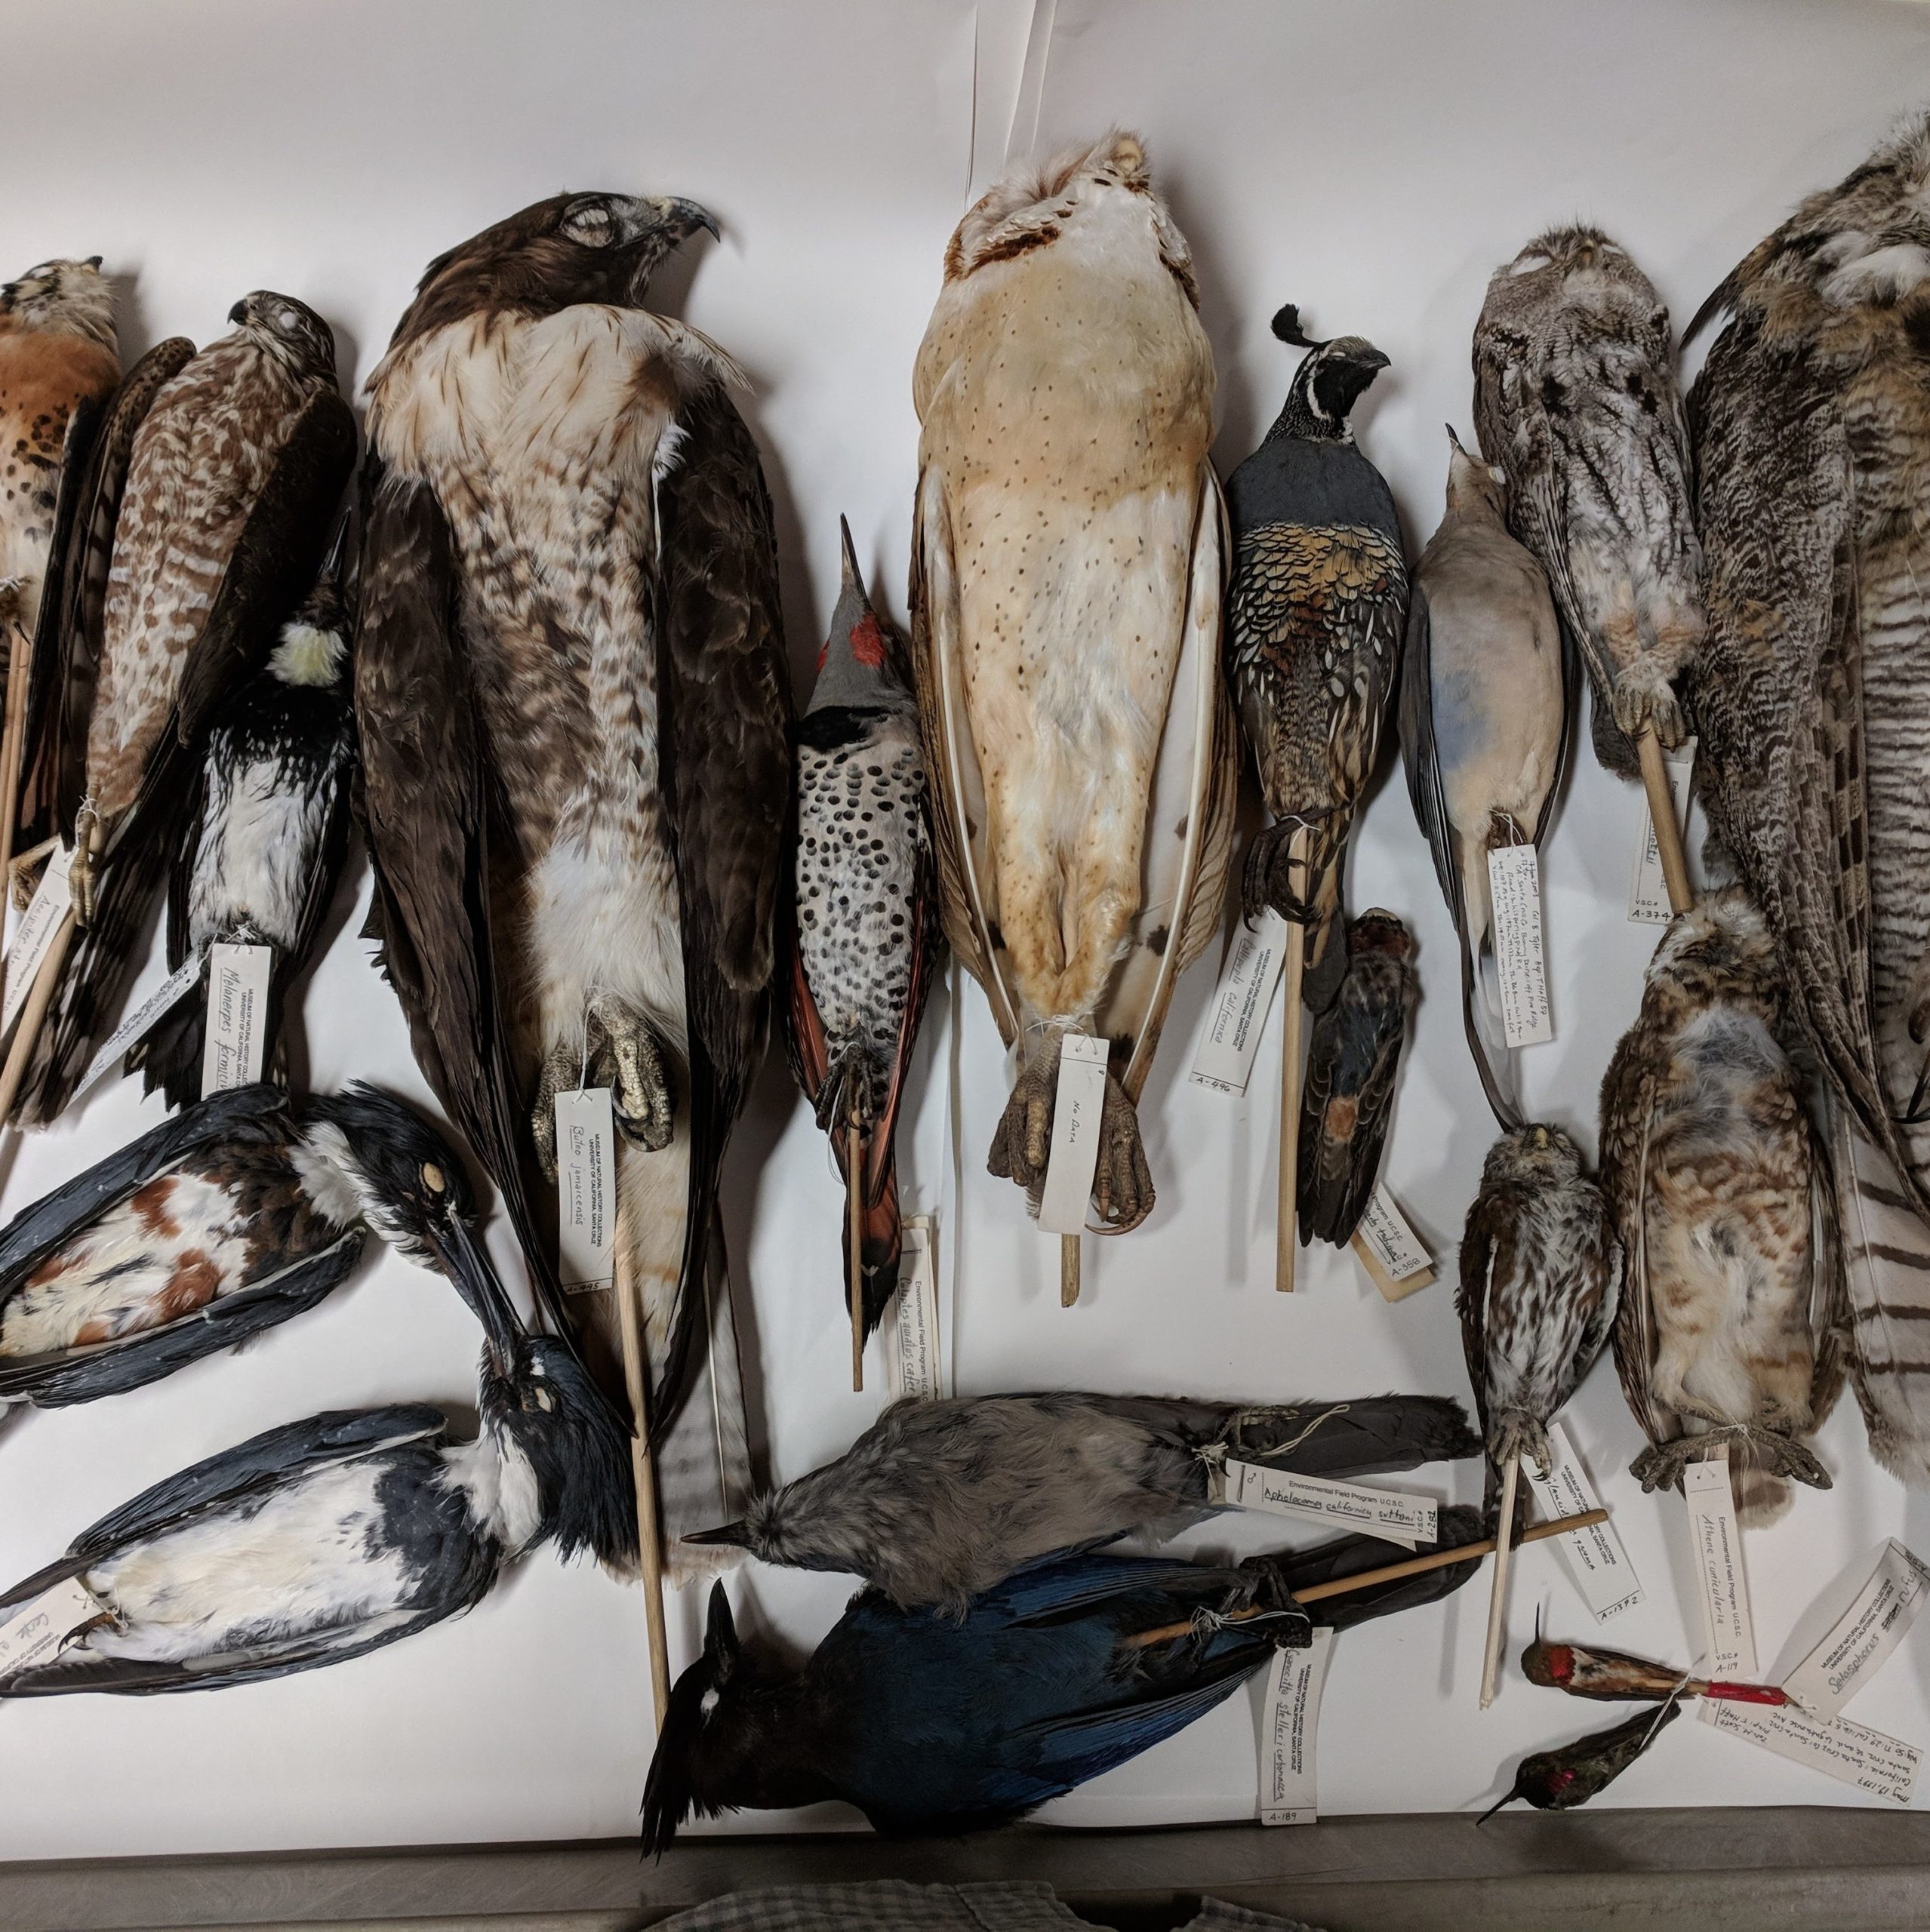 Image of several study skins of birds from the Norris Center.